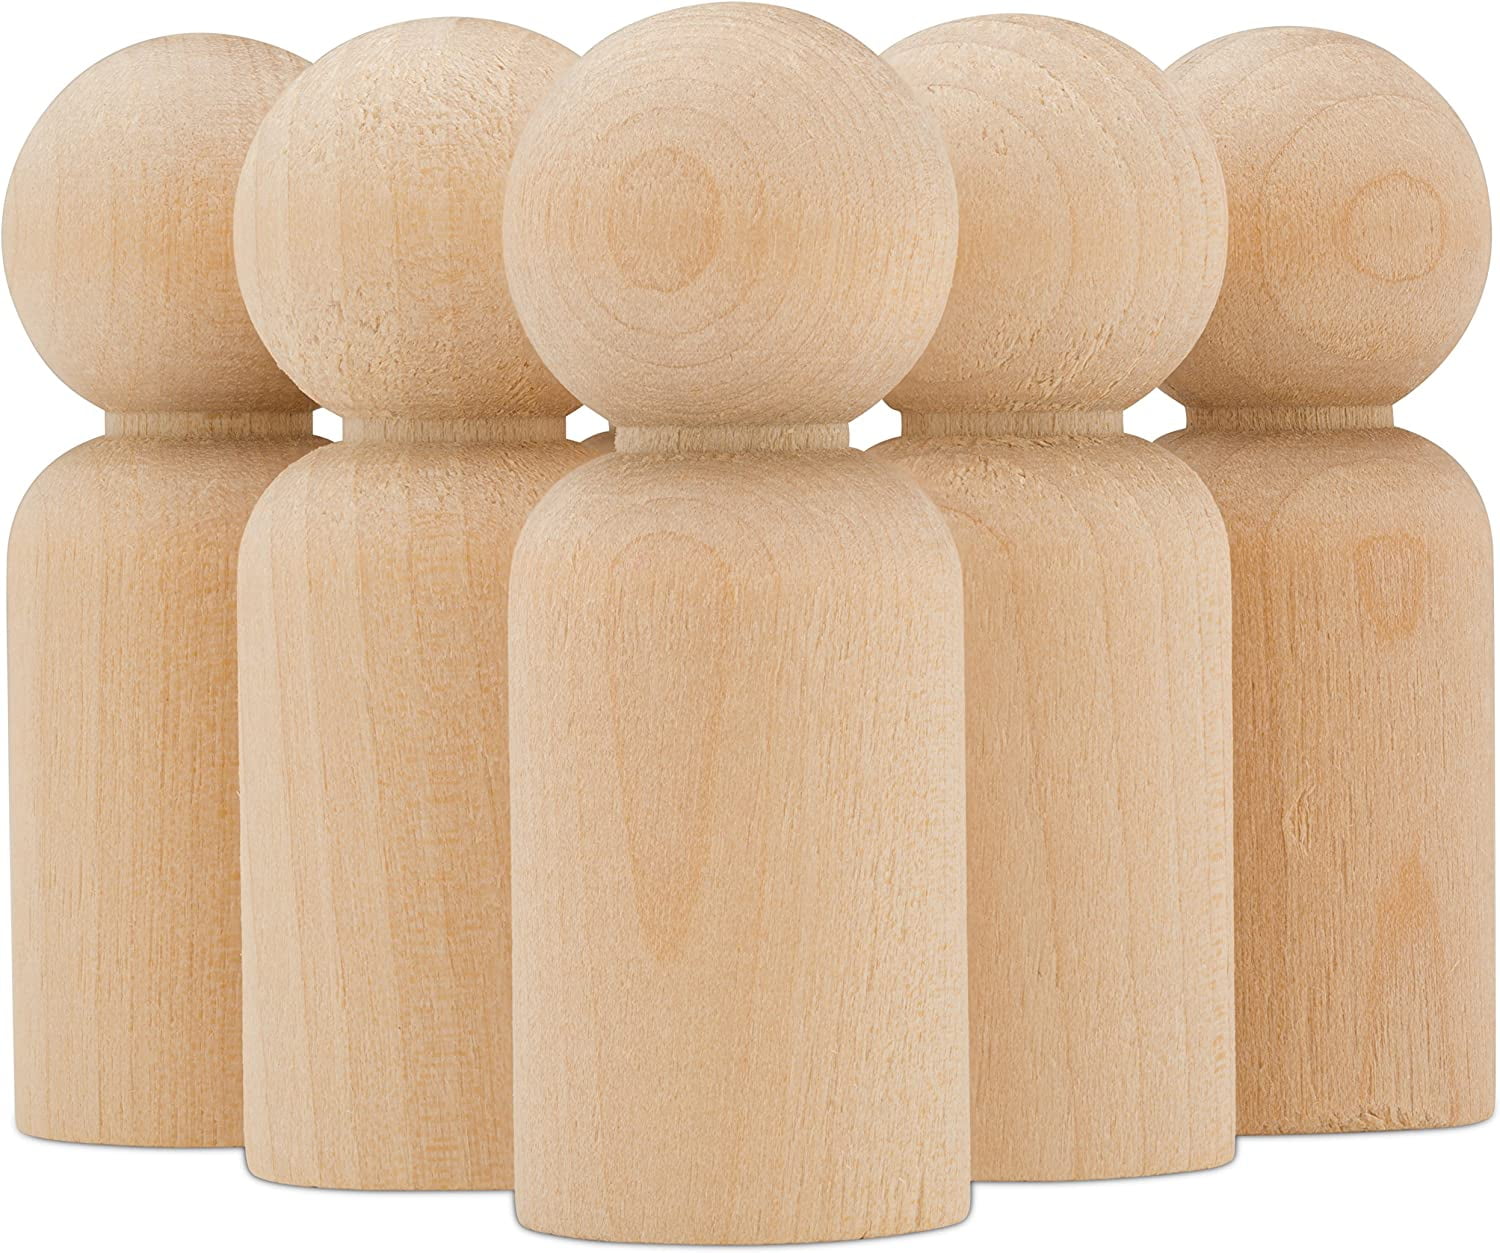 Wood Peg Dolls Unfinished 2-3/8 inch, Pack of 100 Birch Wooden Dad Dolls for Peg People Crafts and Small World Play, Size: 50